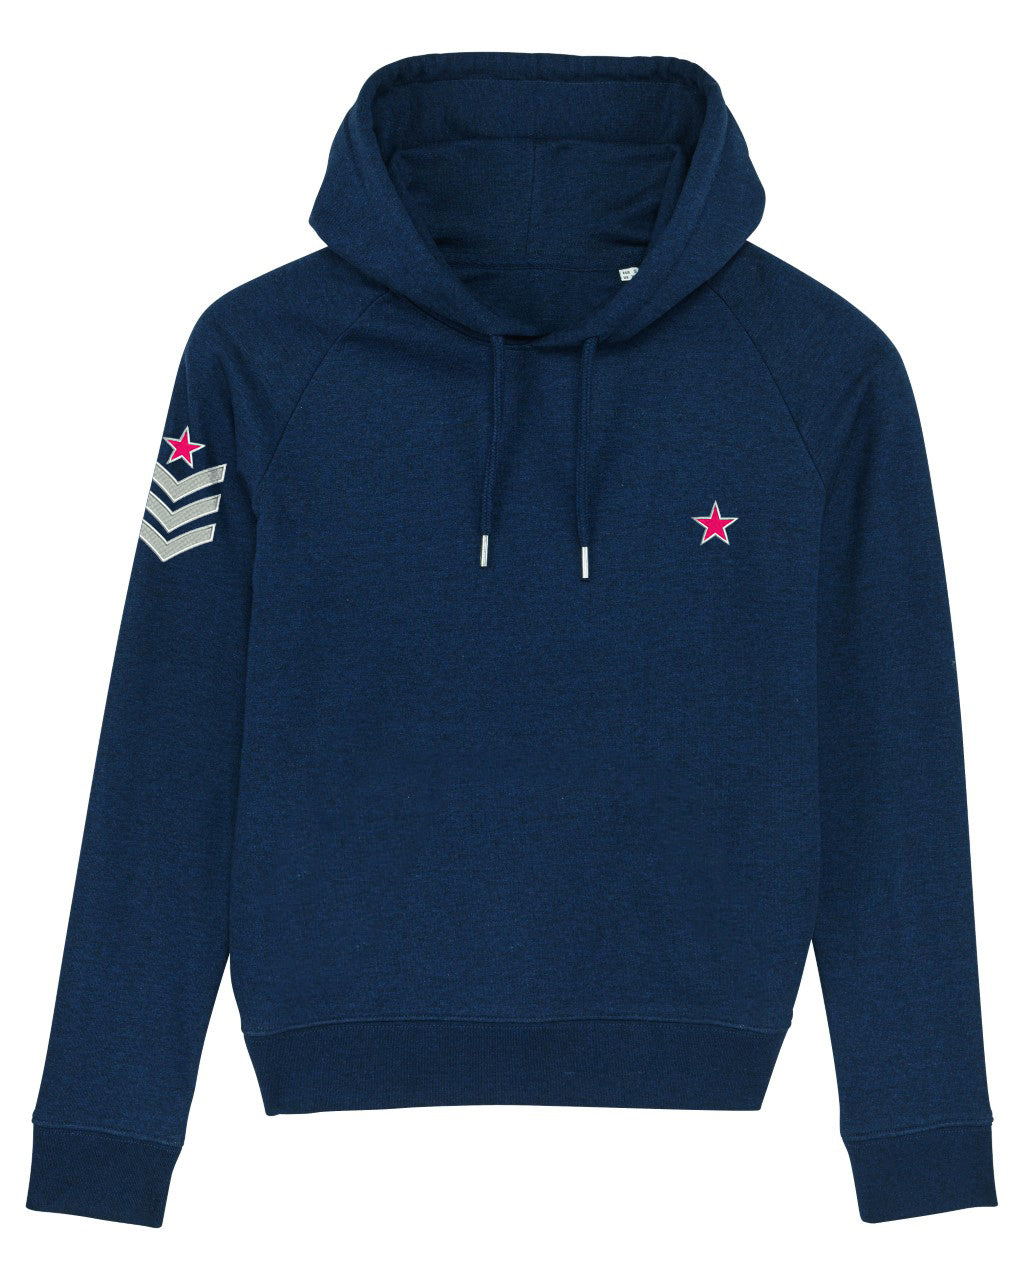 Navy Military Style Hoodie - MADE TO ORDER